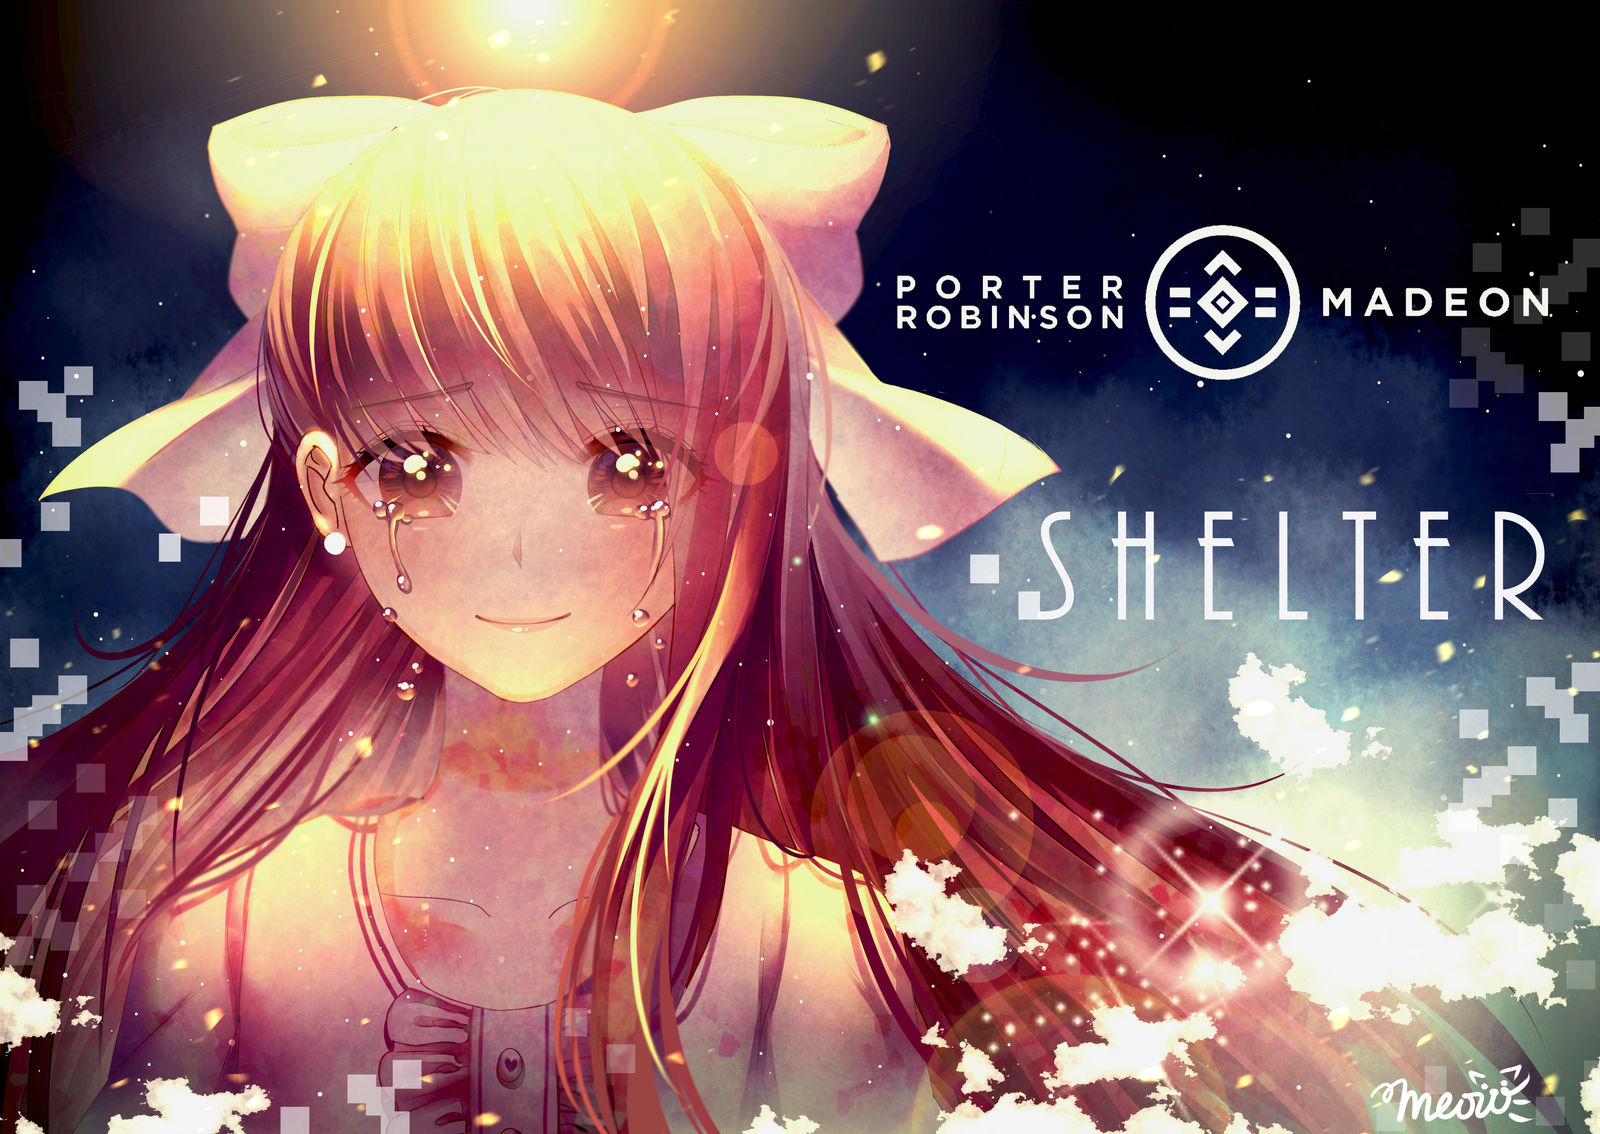 Shelter - Porter Robinson and Madeon by Meowmeowgirlx on DeviantArt